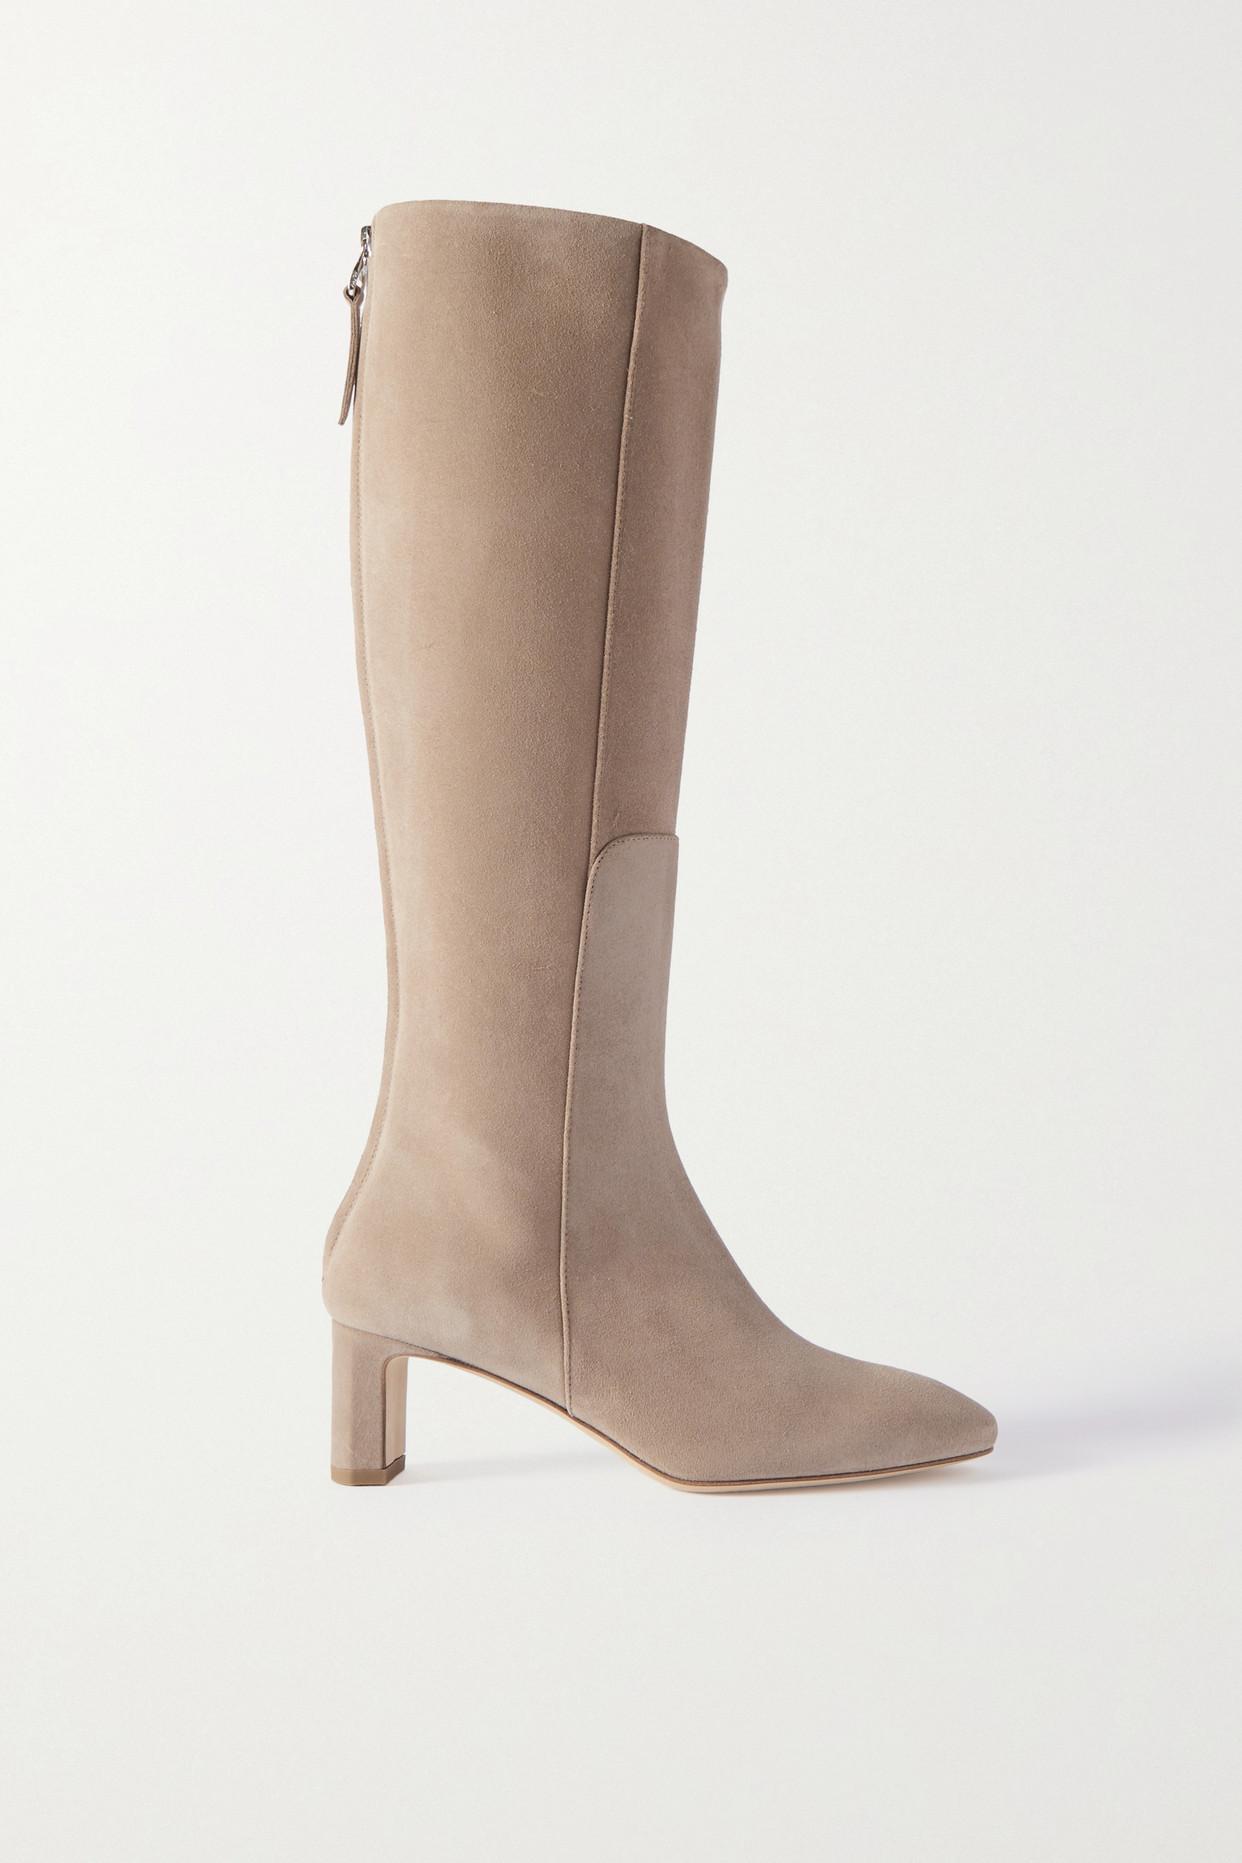 Aeyde Taylor Suede Knee Boots in White | Lyst